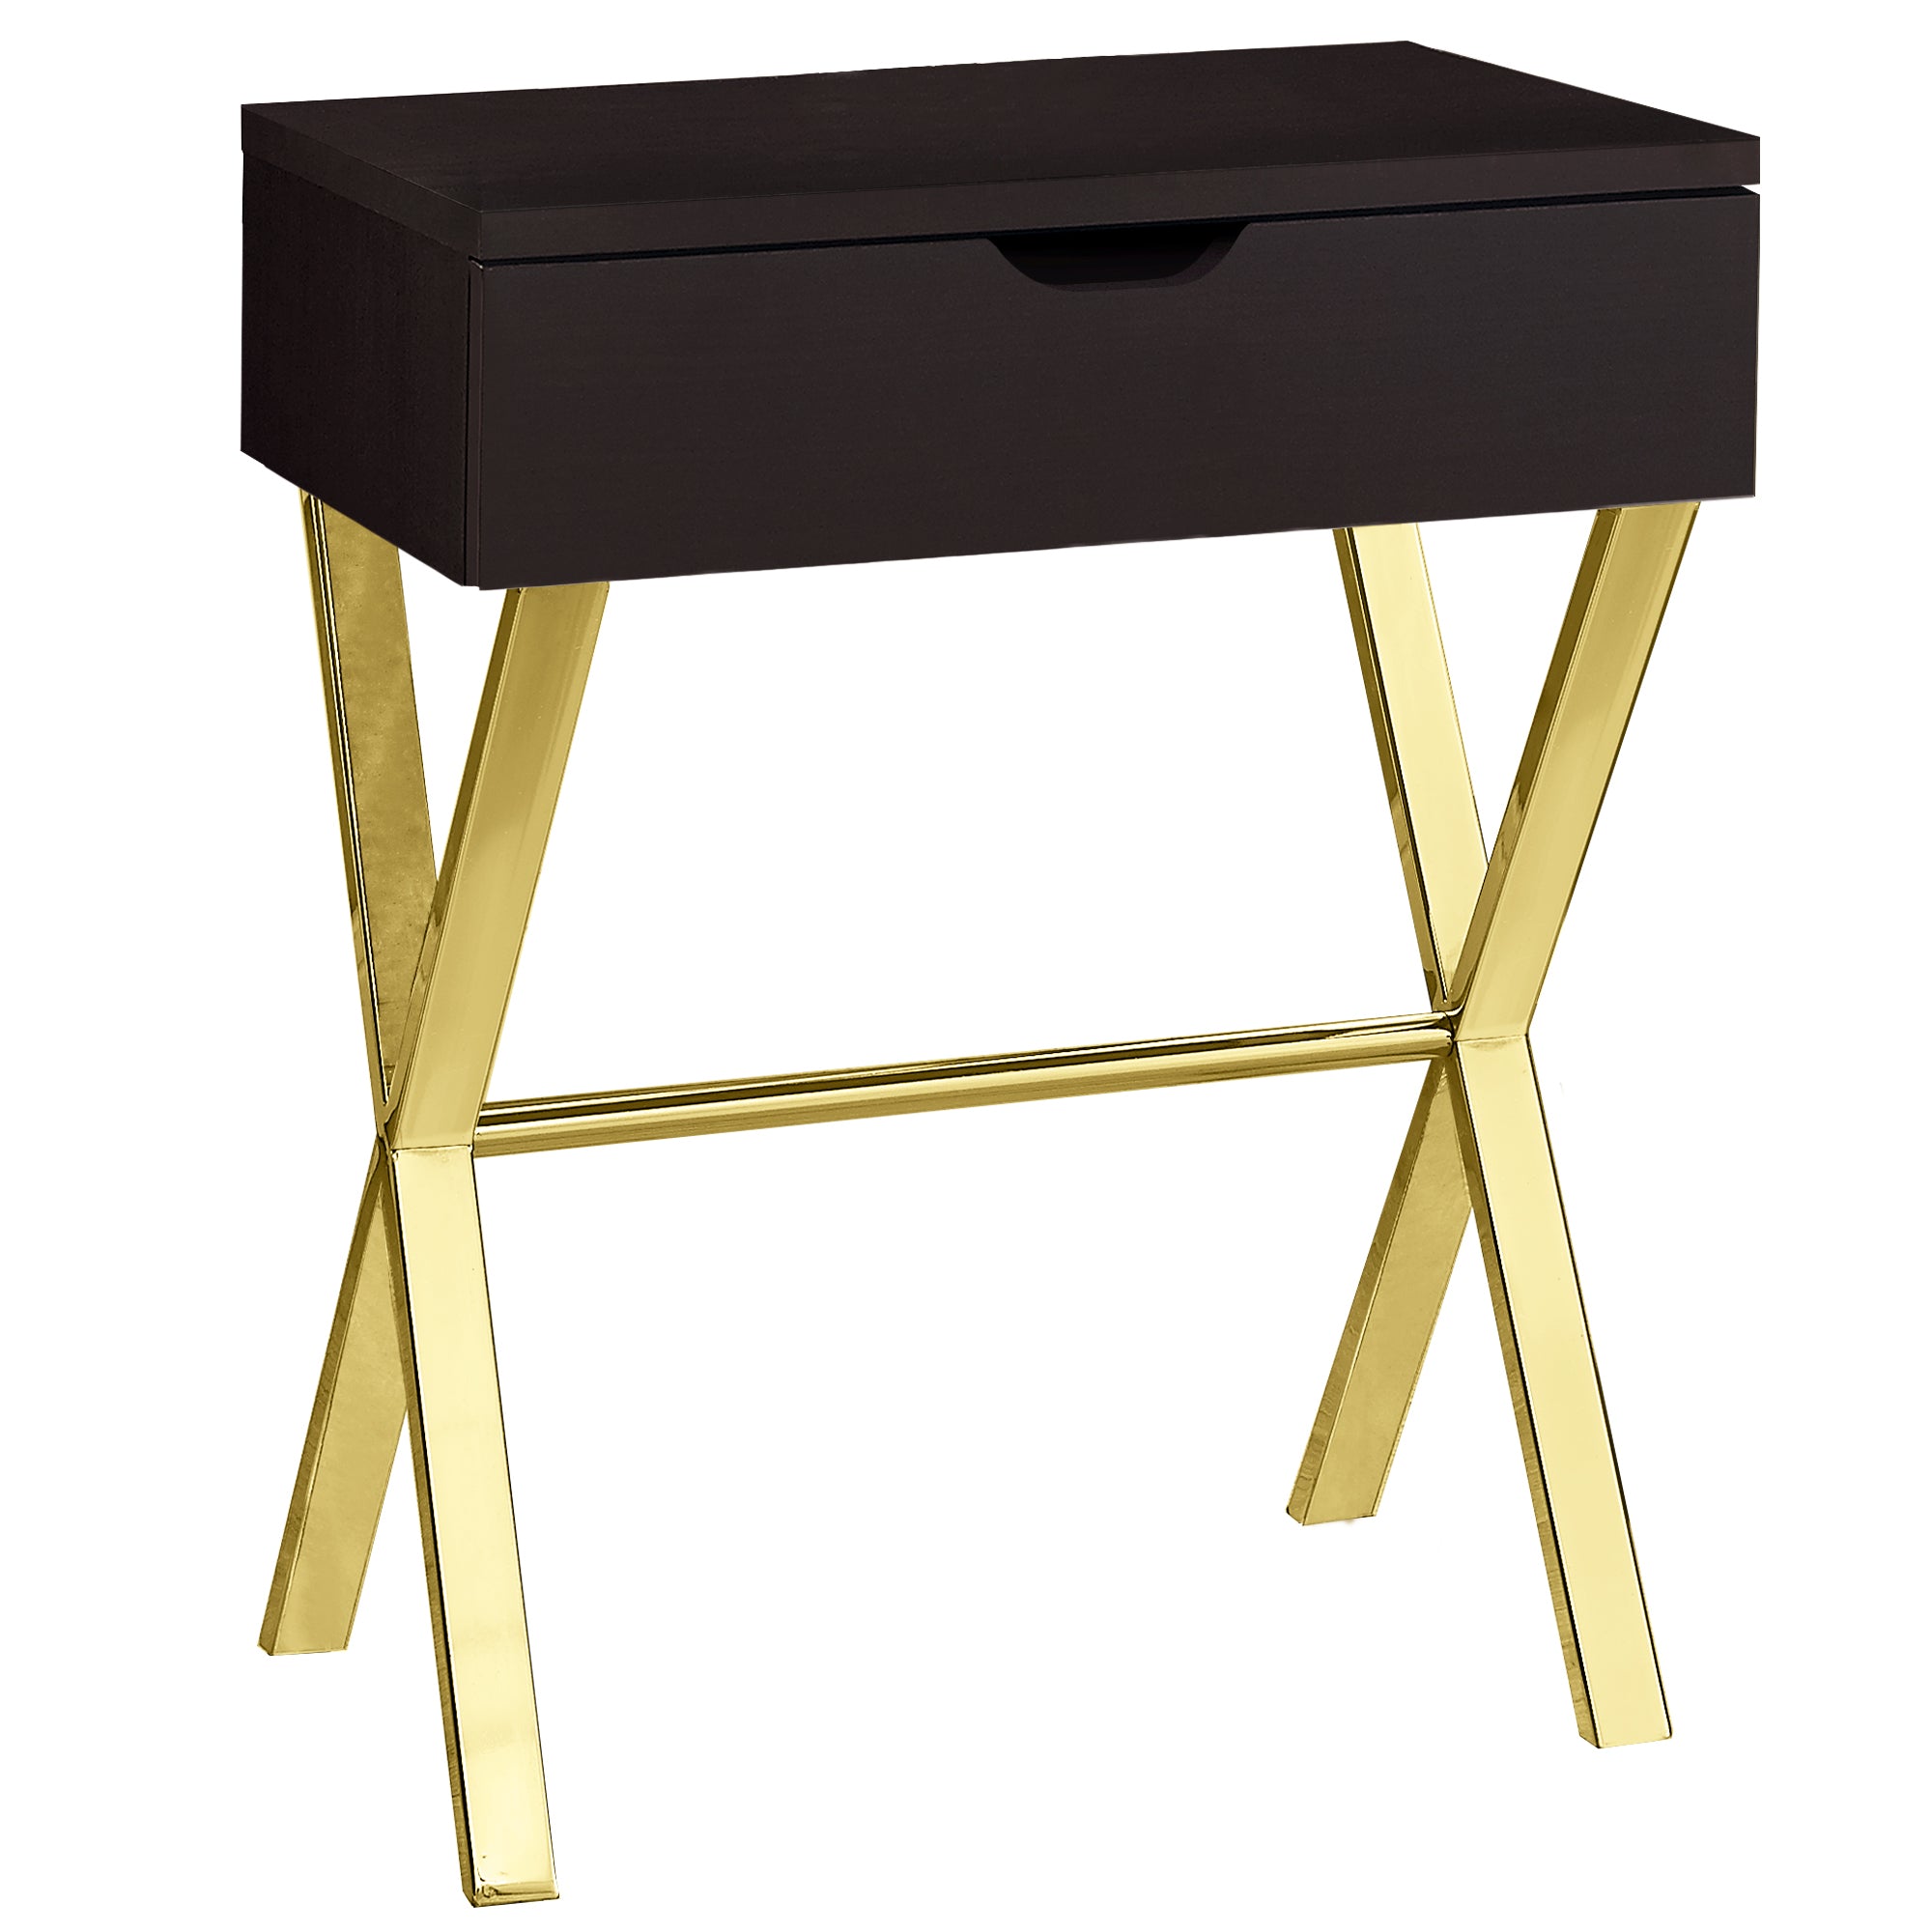 MN-943261    Accent Table, Side, End, Nightstand, Lamp, Living Room, Bedroom, Metal Legs, Laminate, Dark Brown, Gold, Contemporary, Modern